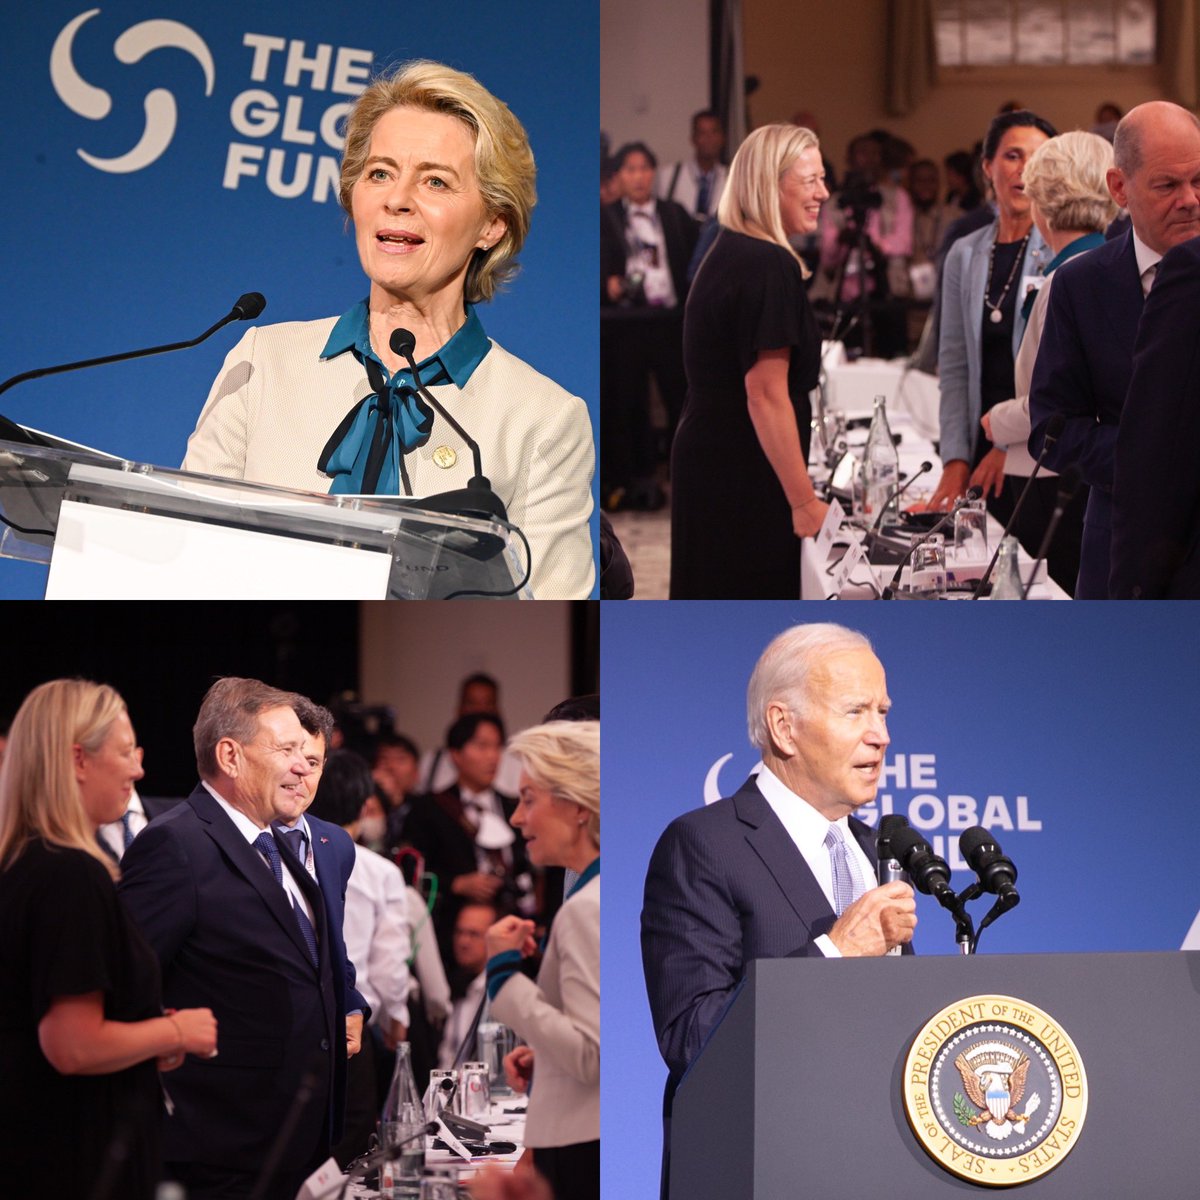 #TeamEurope pledged over €4.3bn at @GlobalFund event, convened by @POTUS.

We fought COVID-19 decisively. Let’s put same energy in eradicating AIDS, malaria & TB - #FightForWhatCounts!

🇪🇺 is committed to improving the lives of all, leaving no one behind.
#EUGlobalHealthStrategy